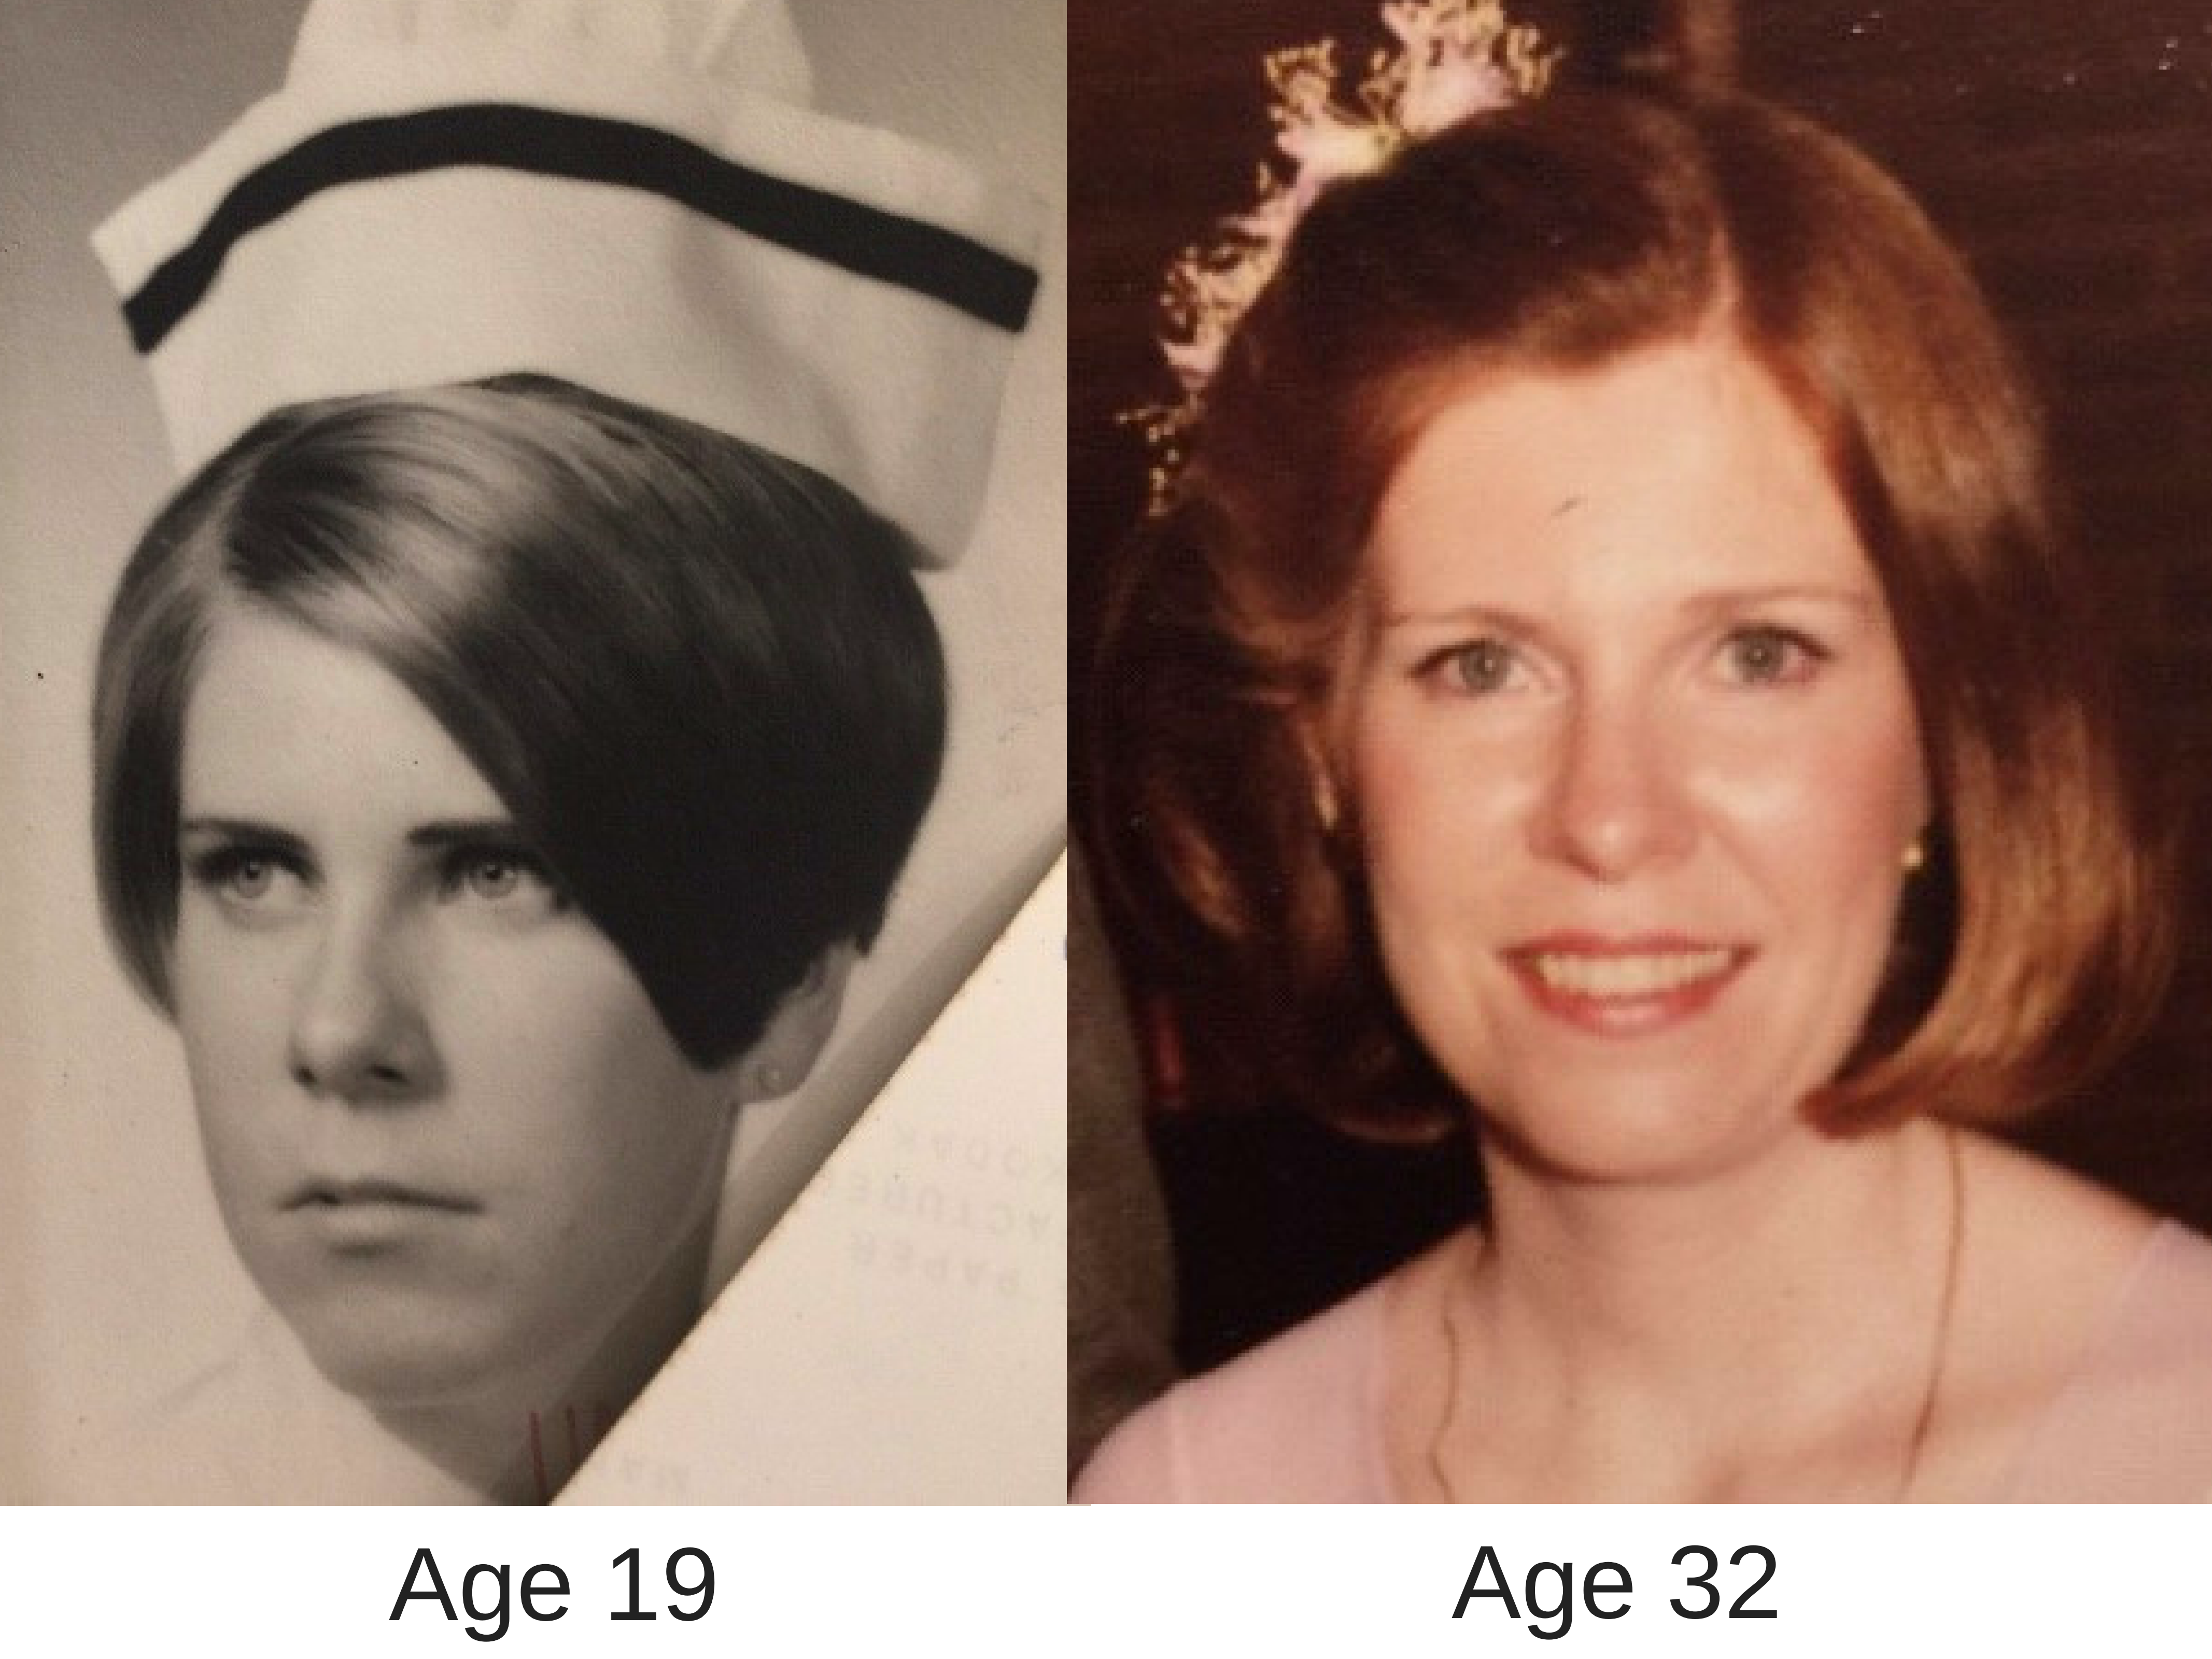 Woman age 19 and 32